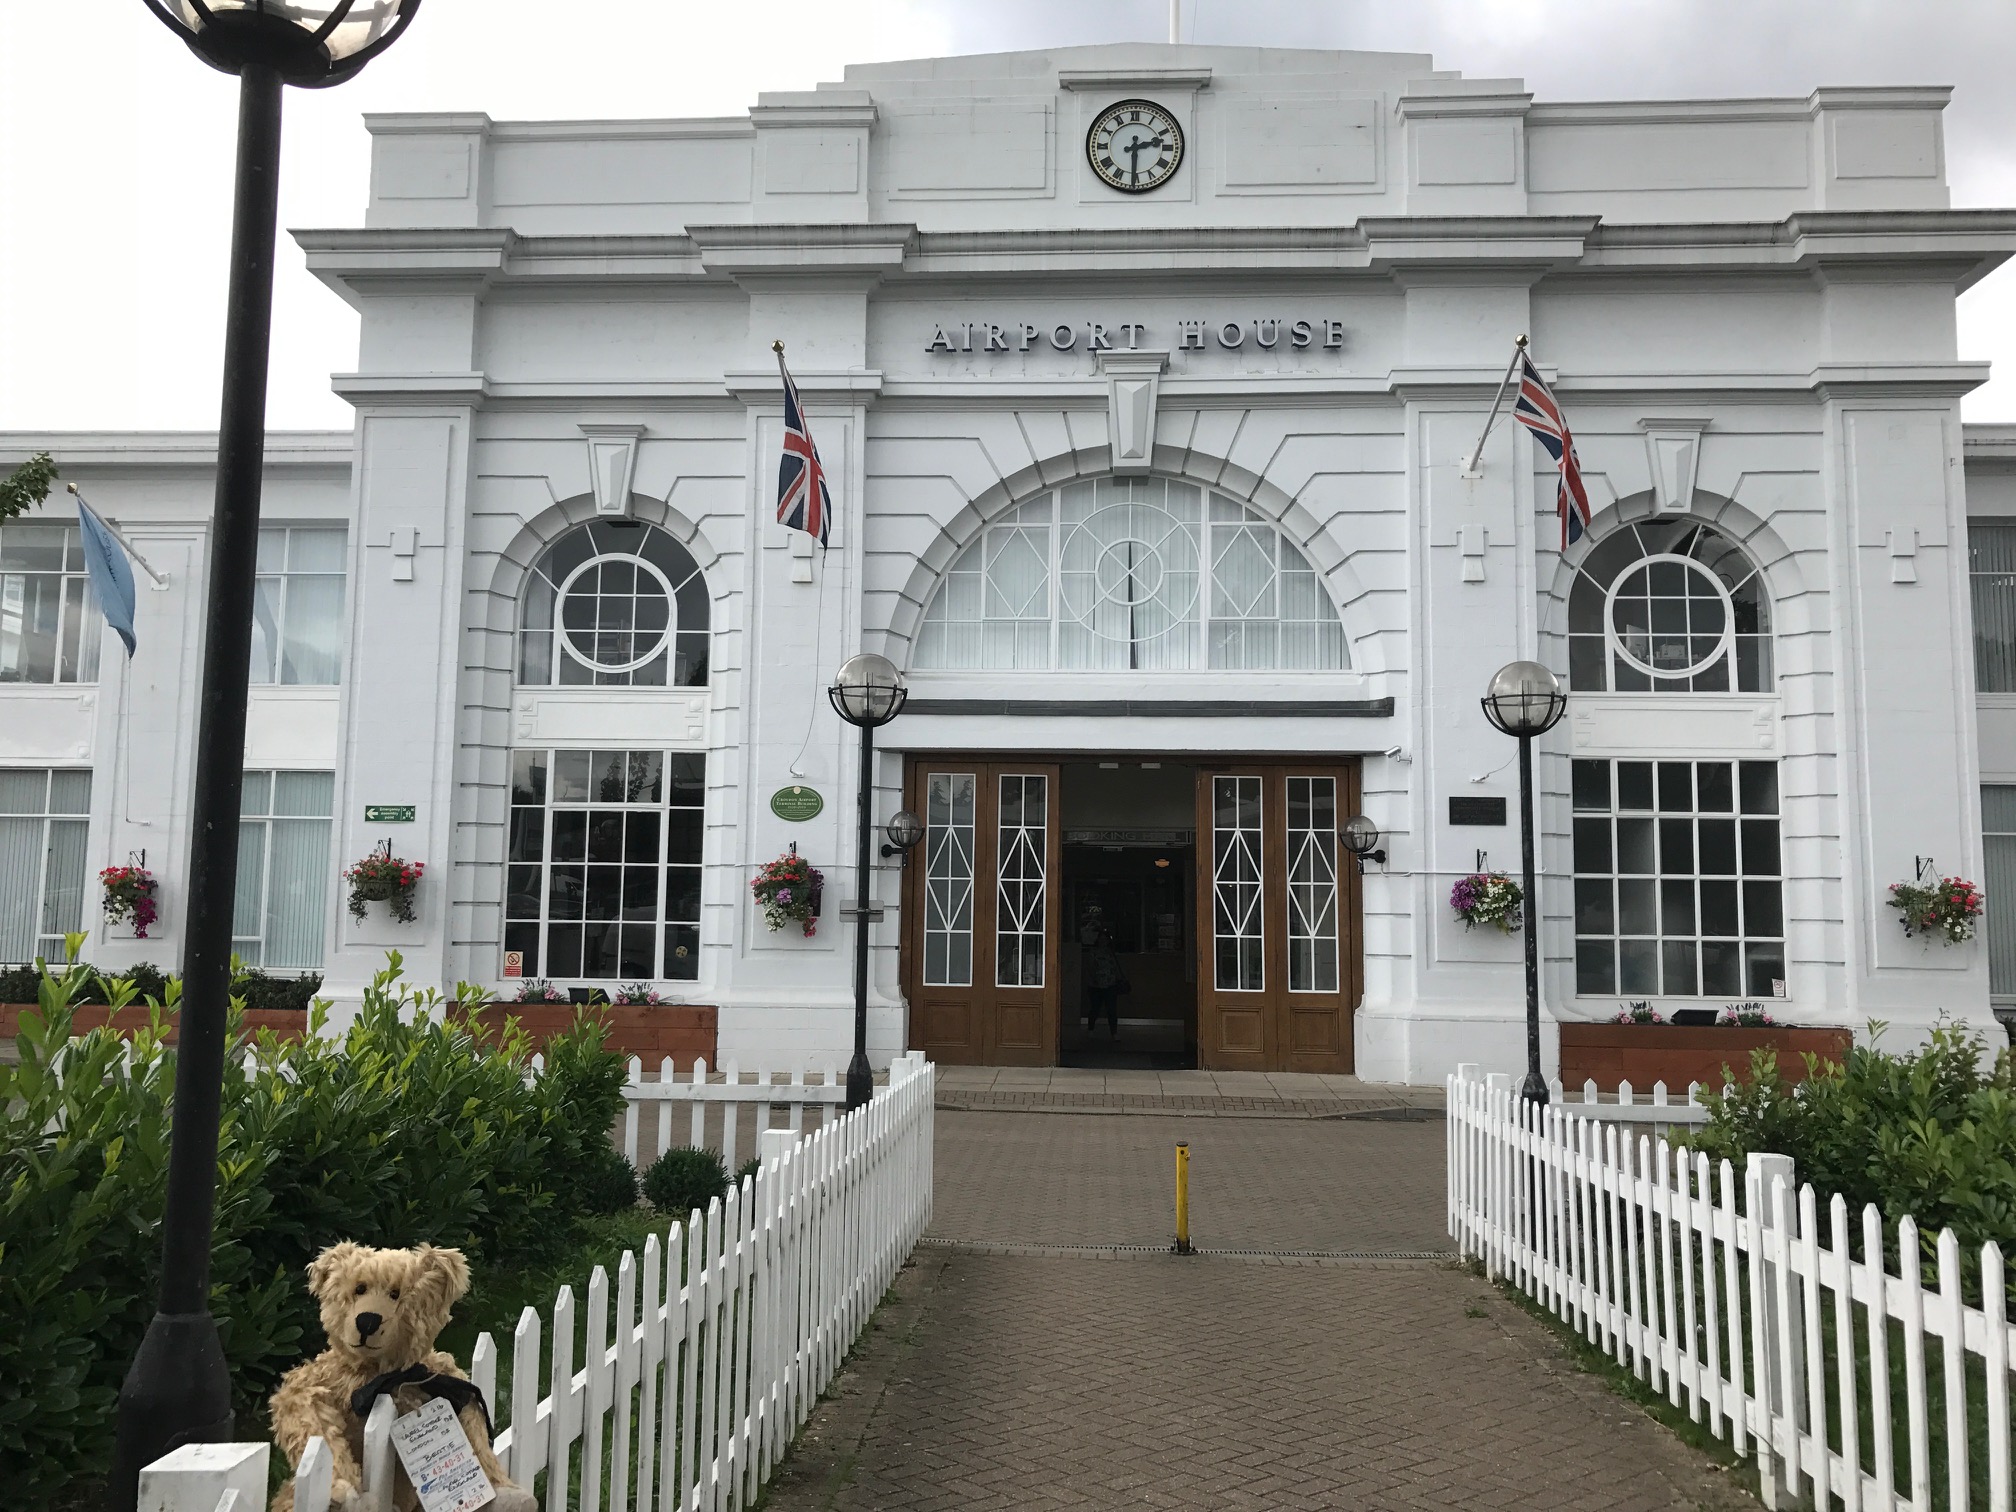 Croydon Airport House. Now the Museum.